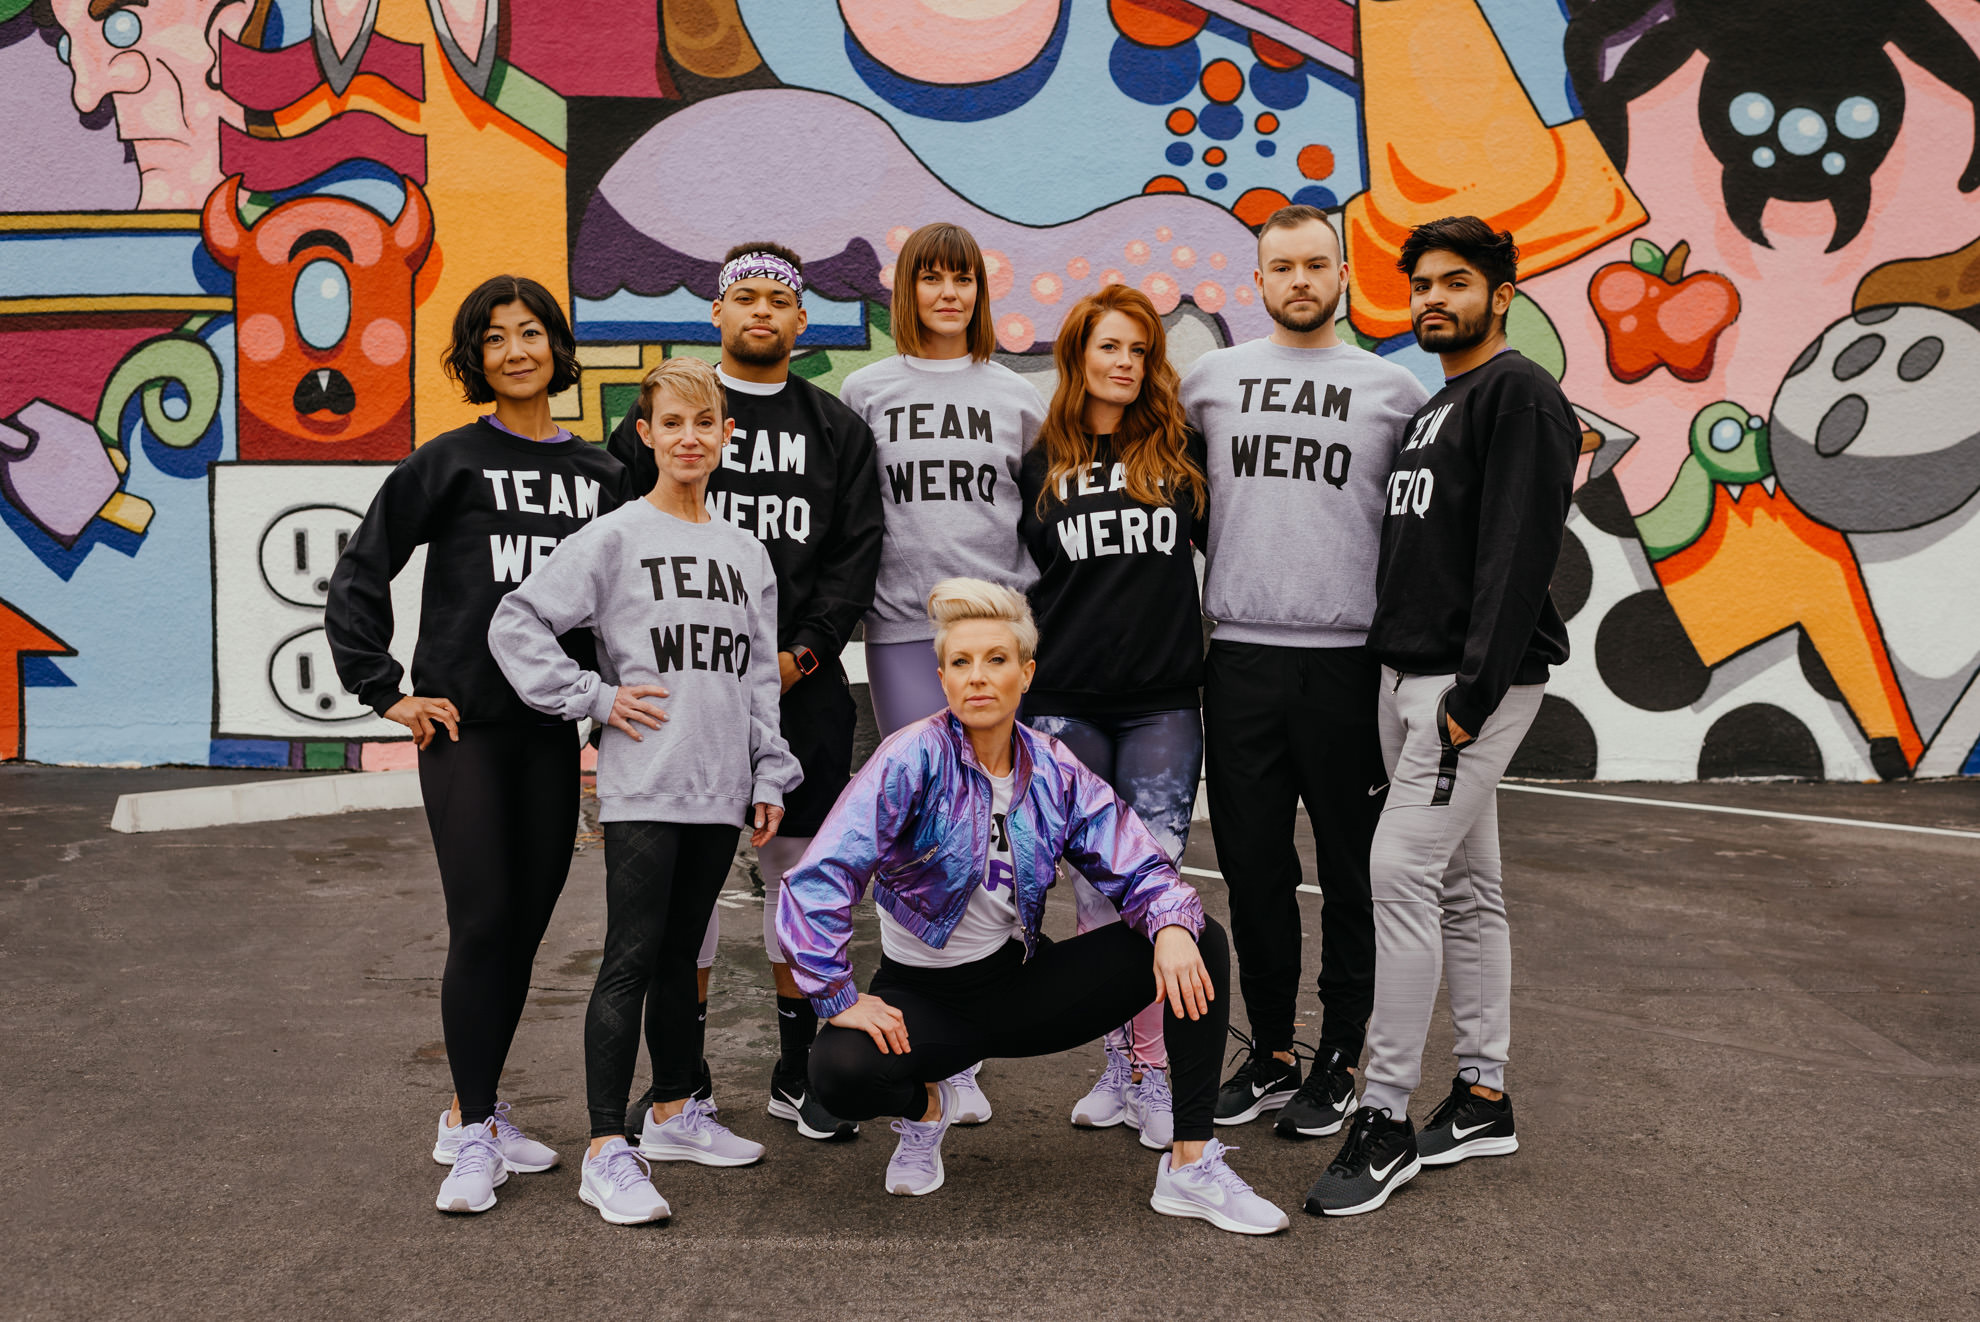 group of diverse people modeling fitness clothing in front of colorful mural